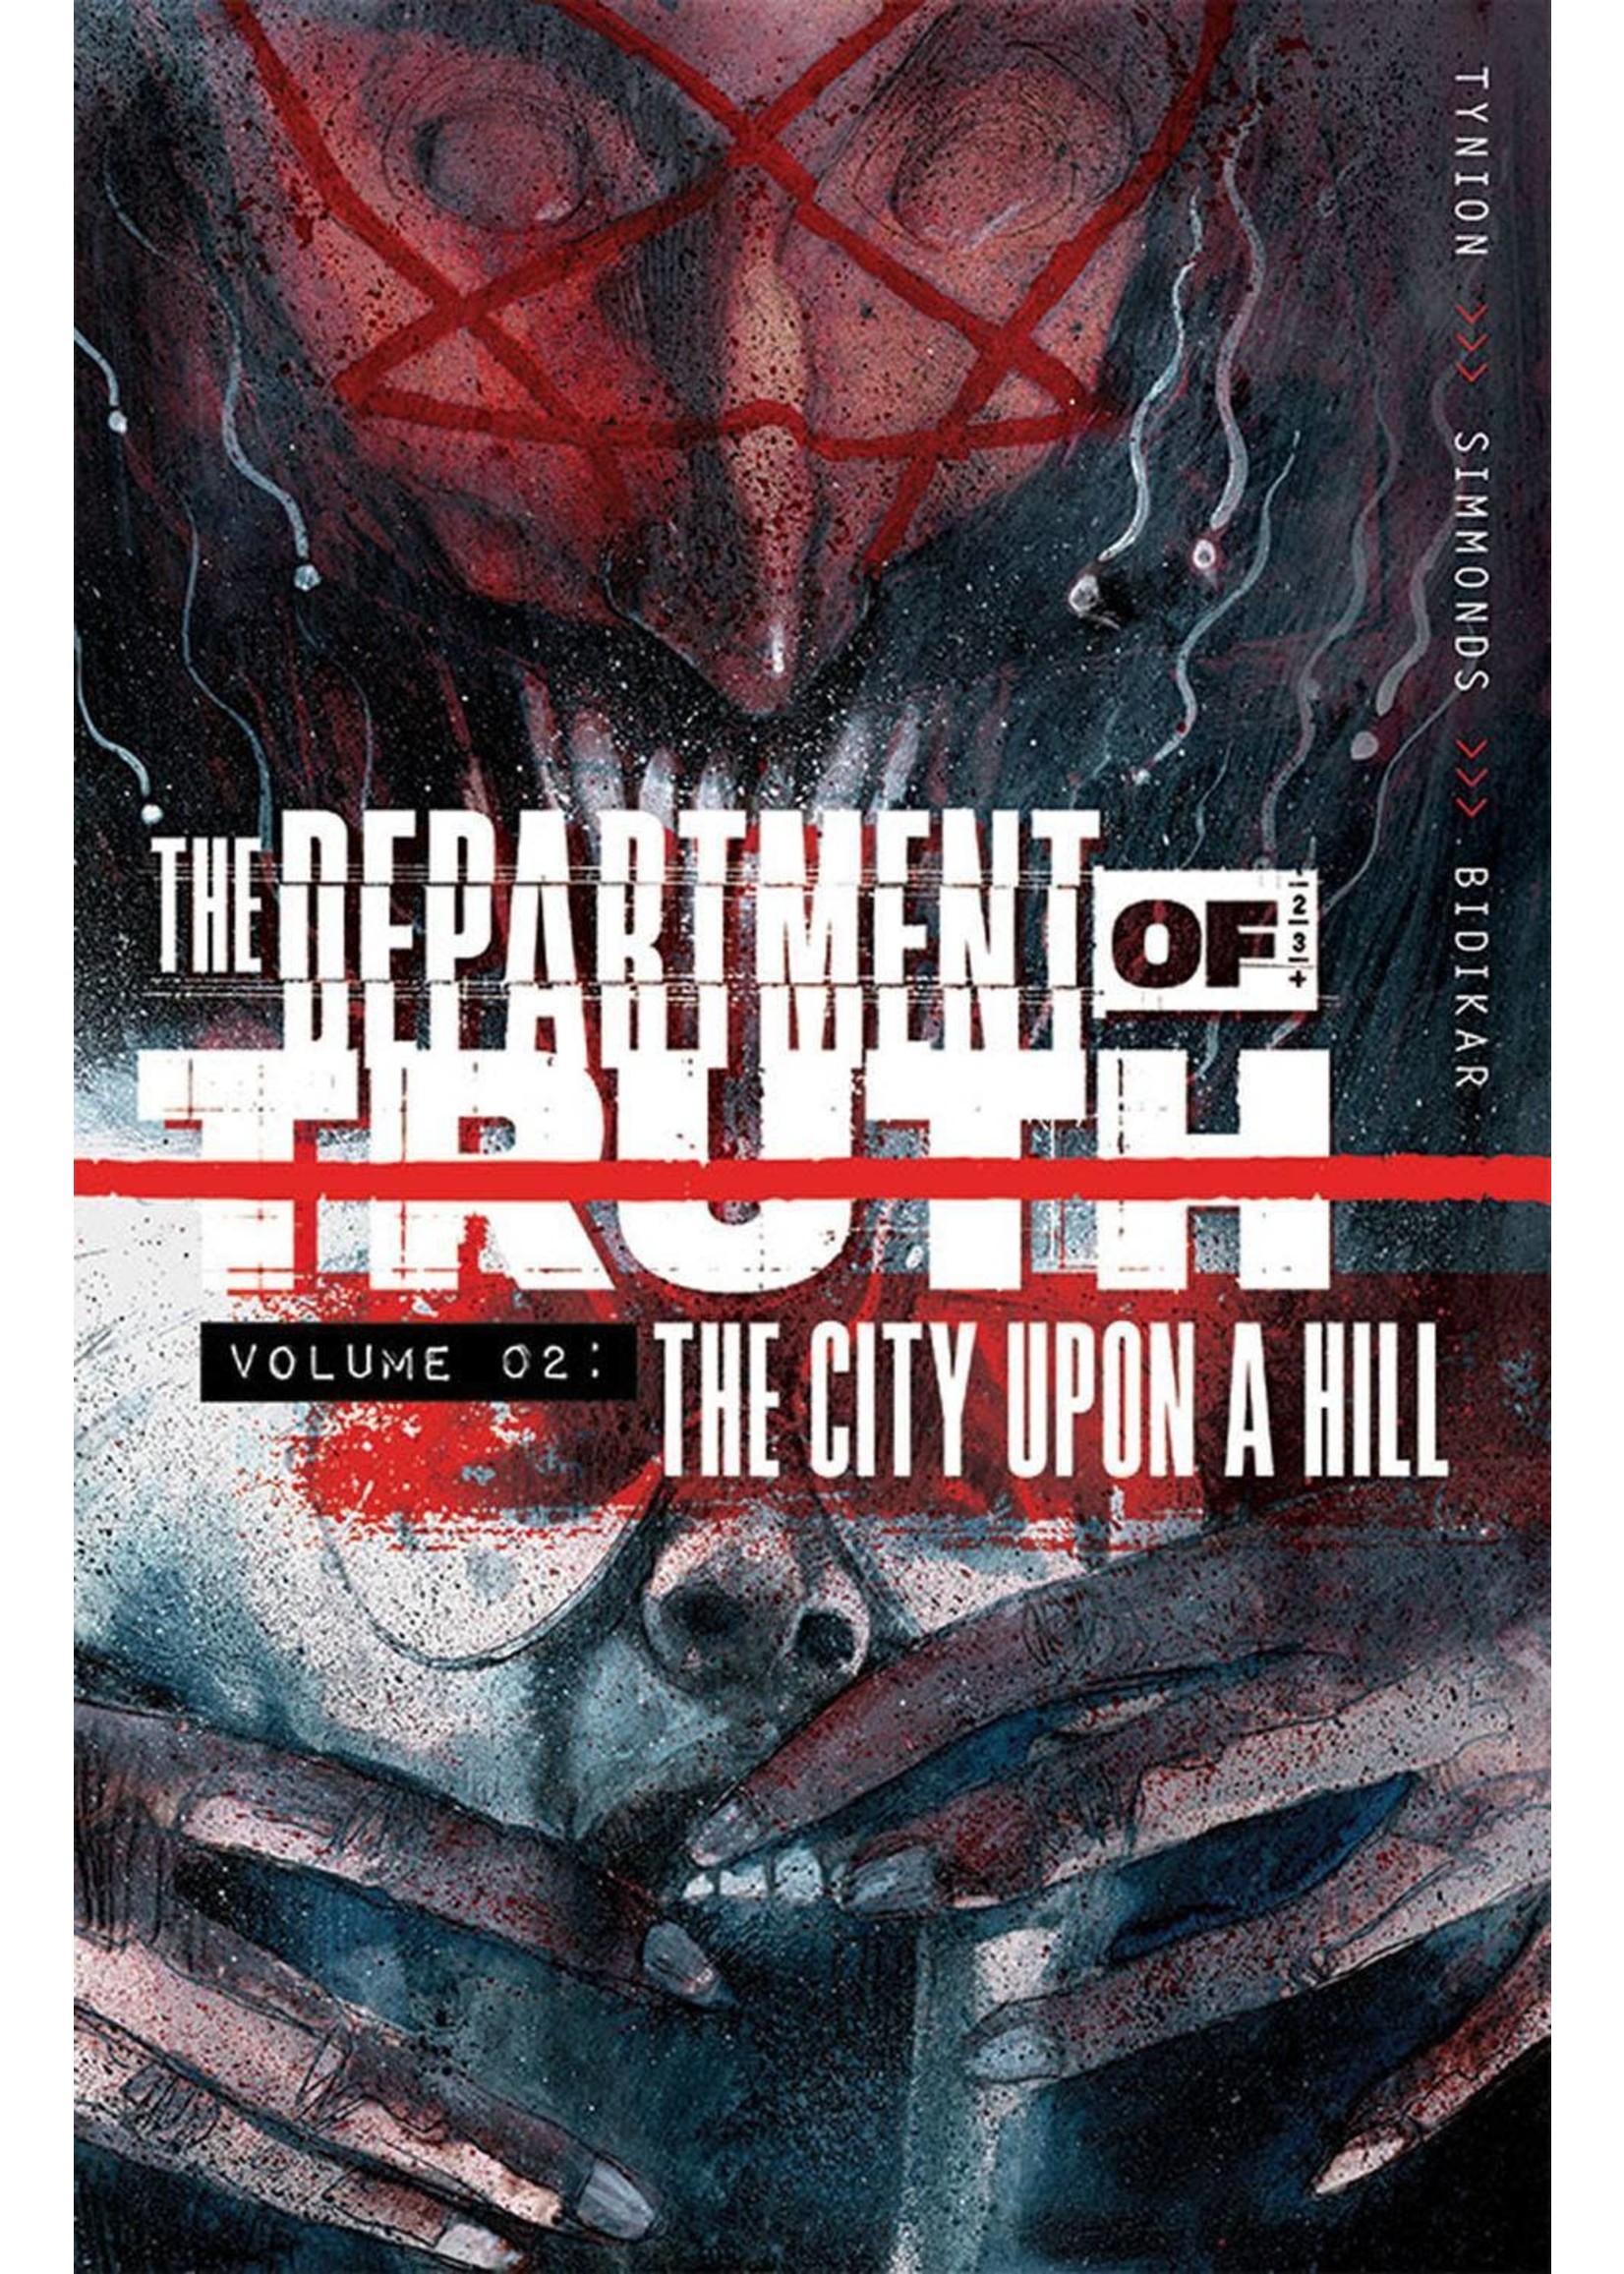 The Department of Truth - Vol 02: The City Upon a Hill